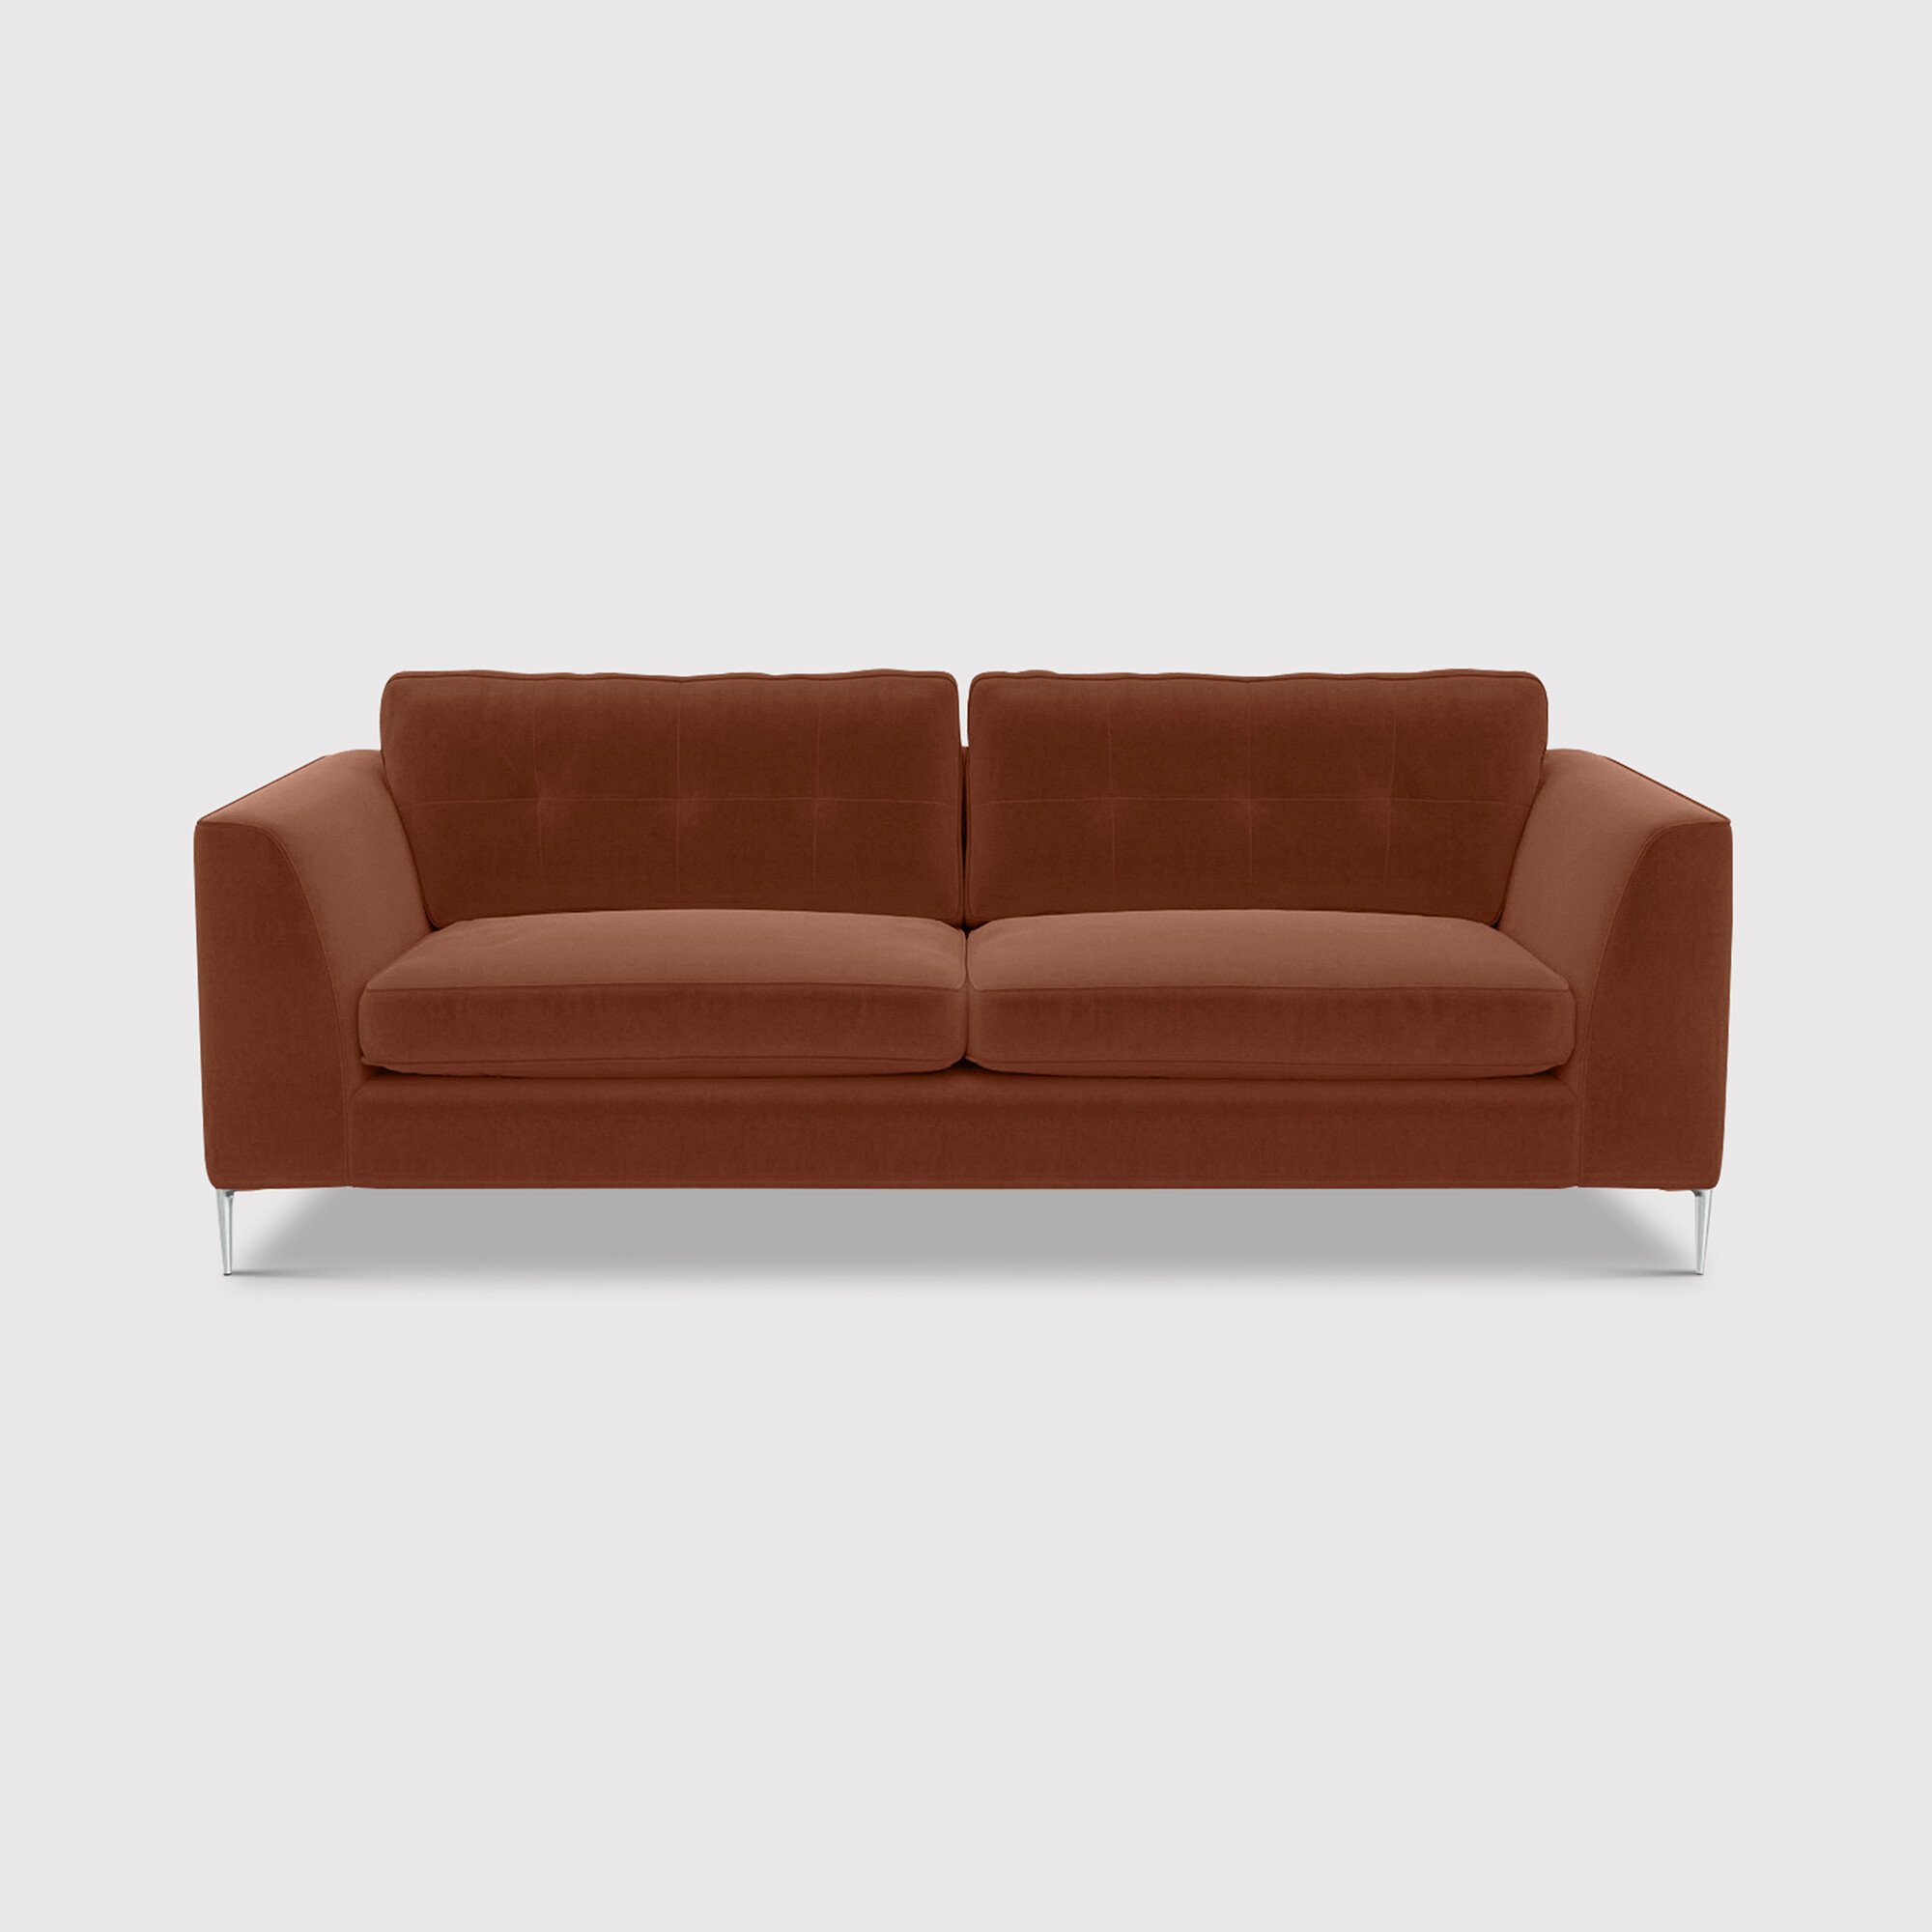 Conza Extra Large Sofa, Red Fabric | Barker & Stonehouse